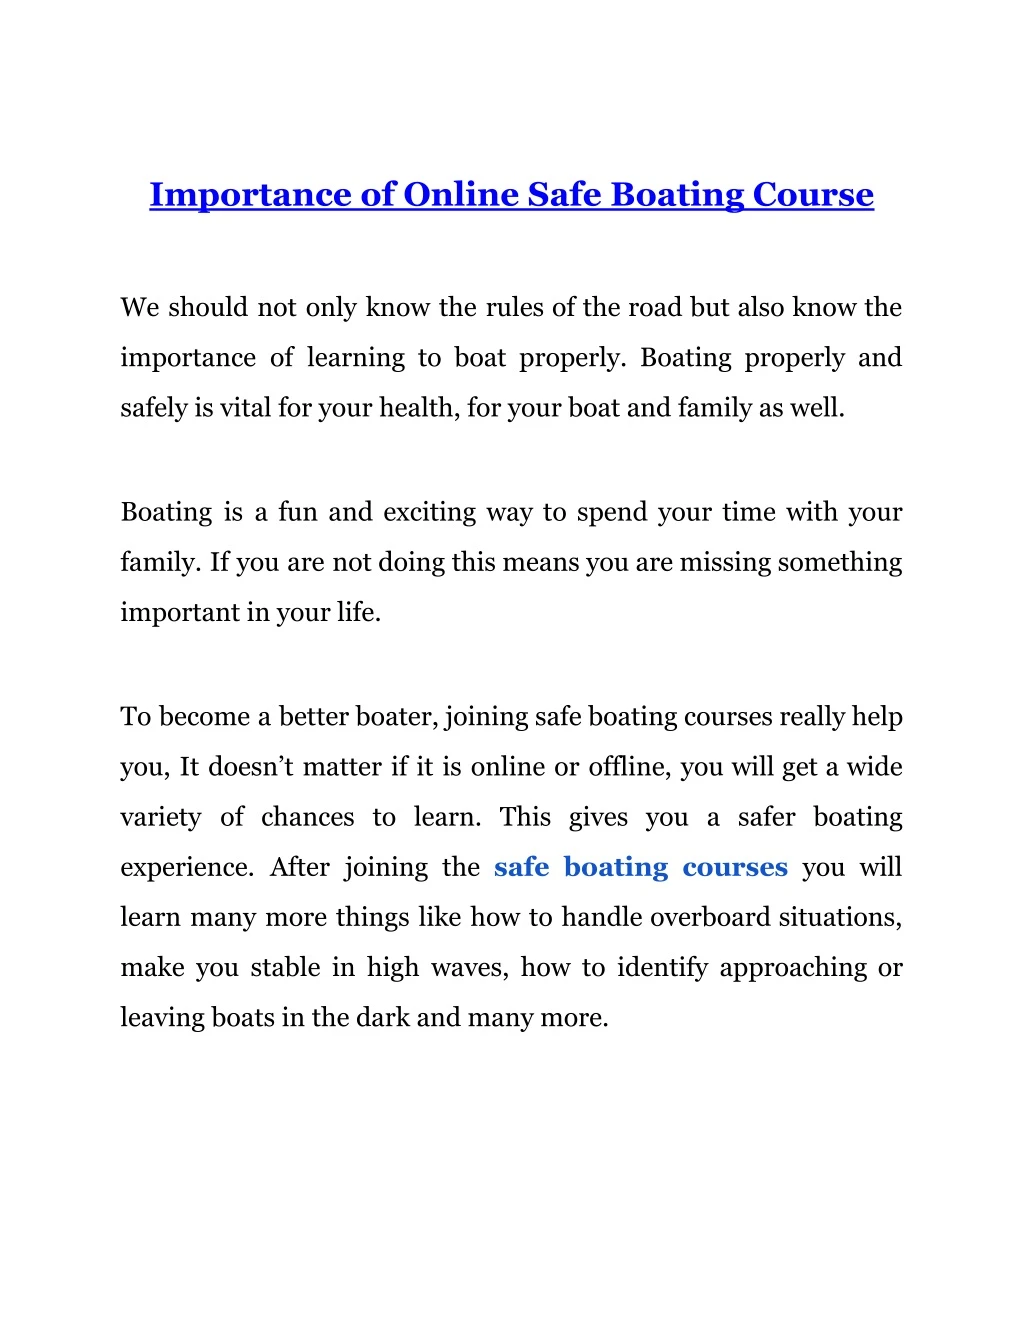 importance of online safe boating course